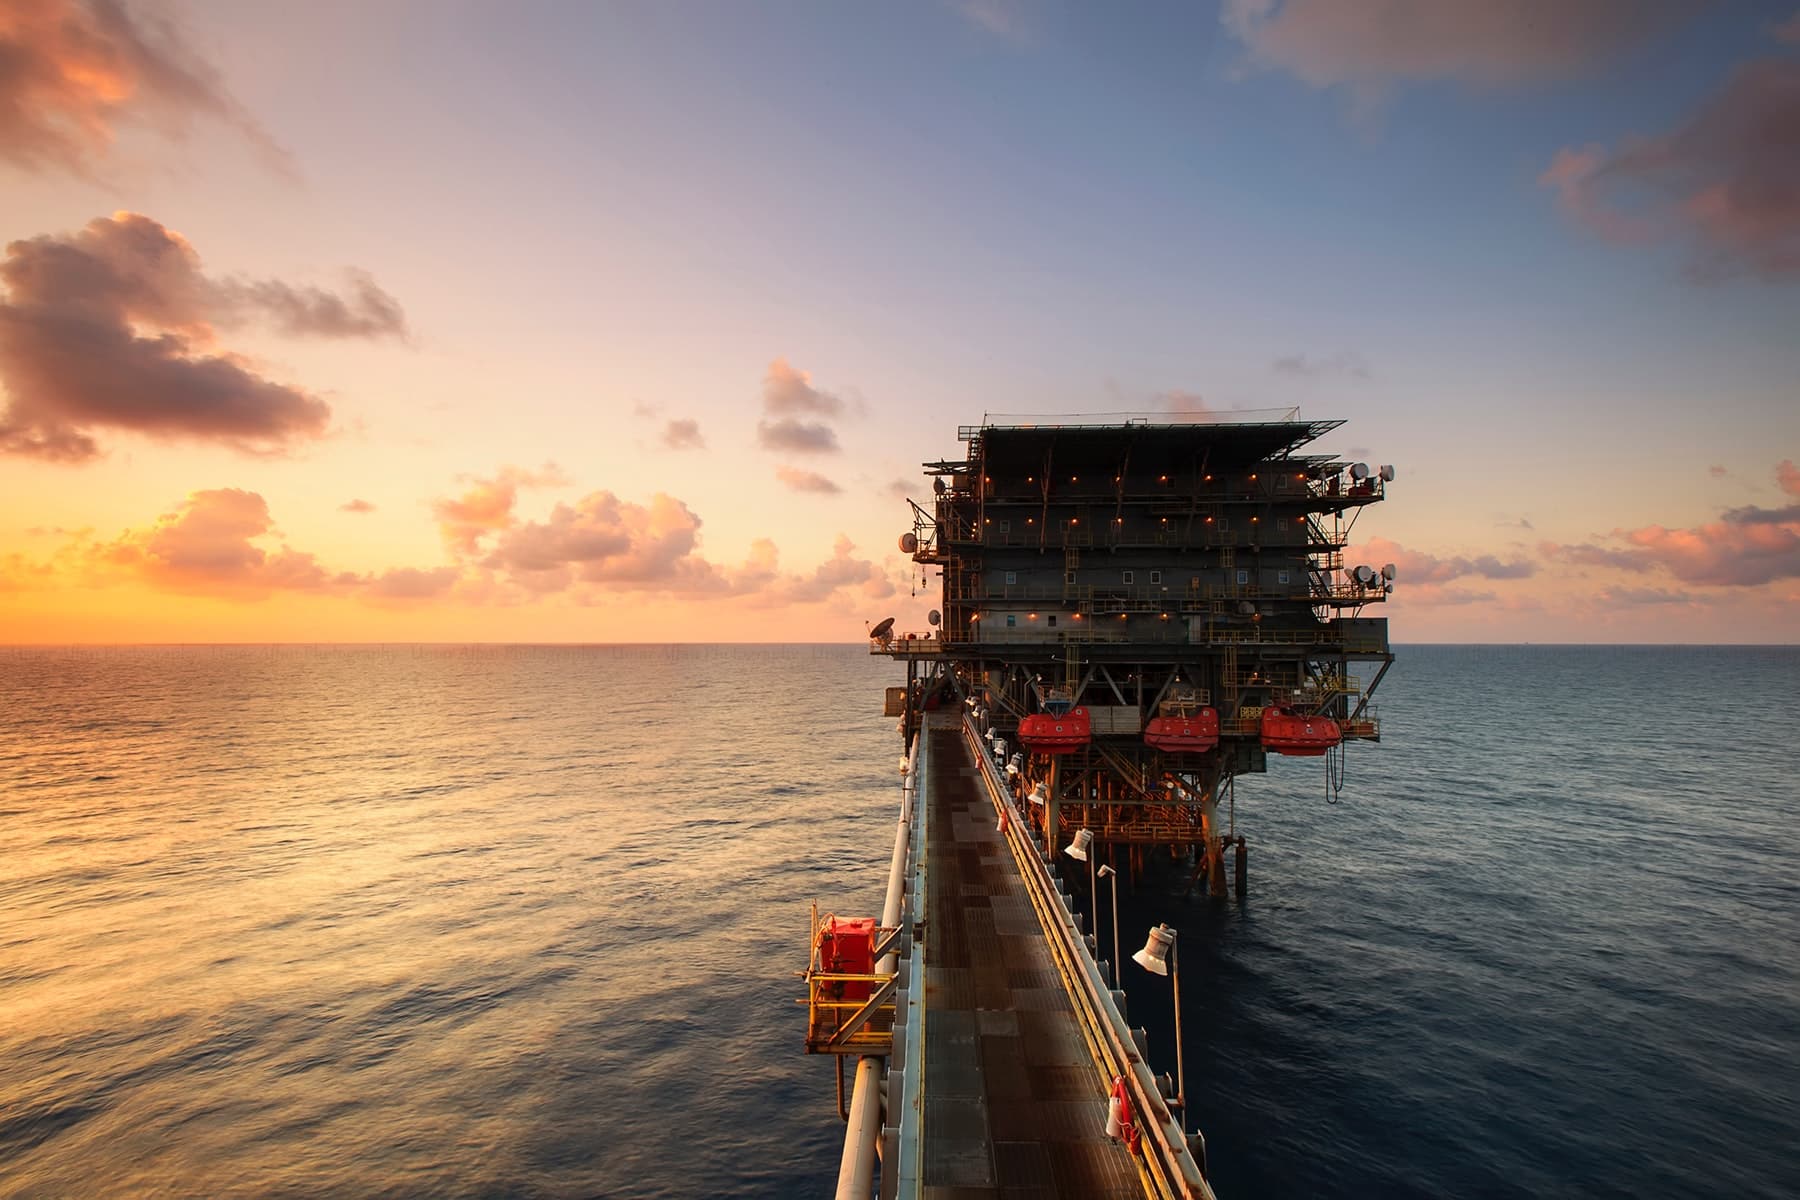 A photograph shows an oil rig standing in the middle of the ocean.